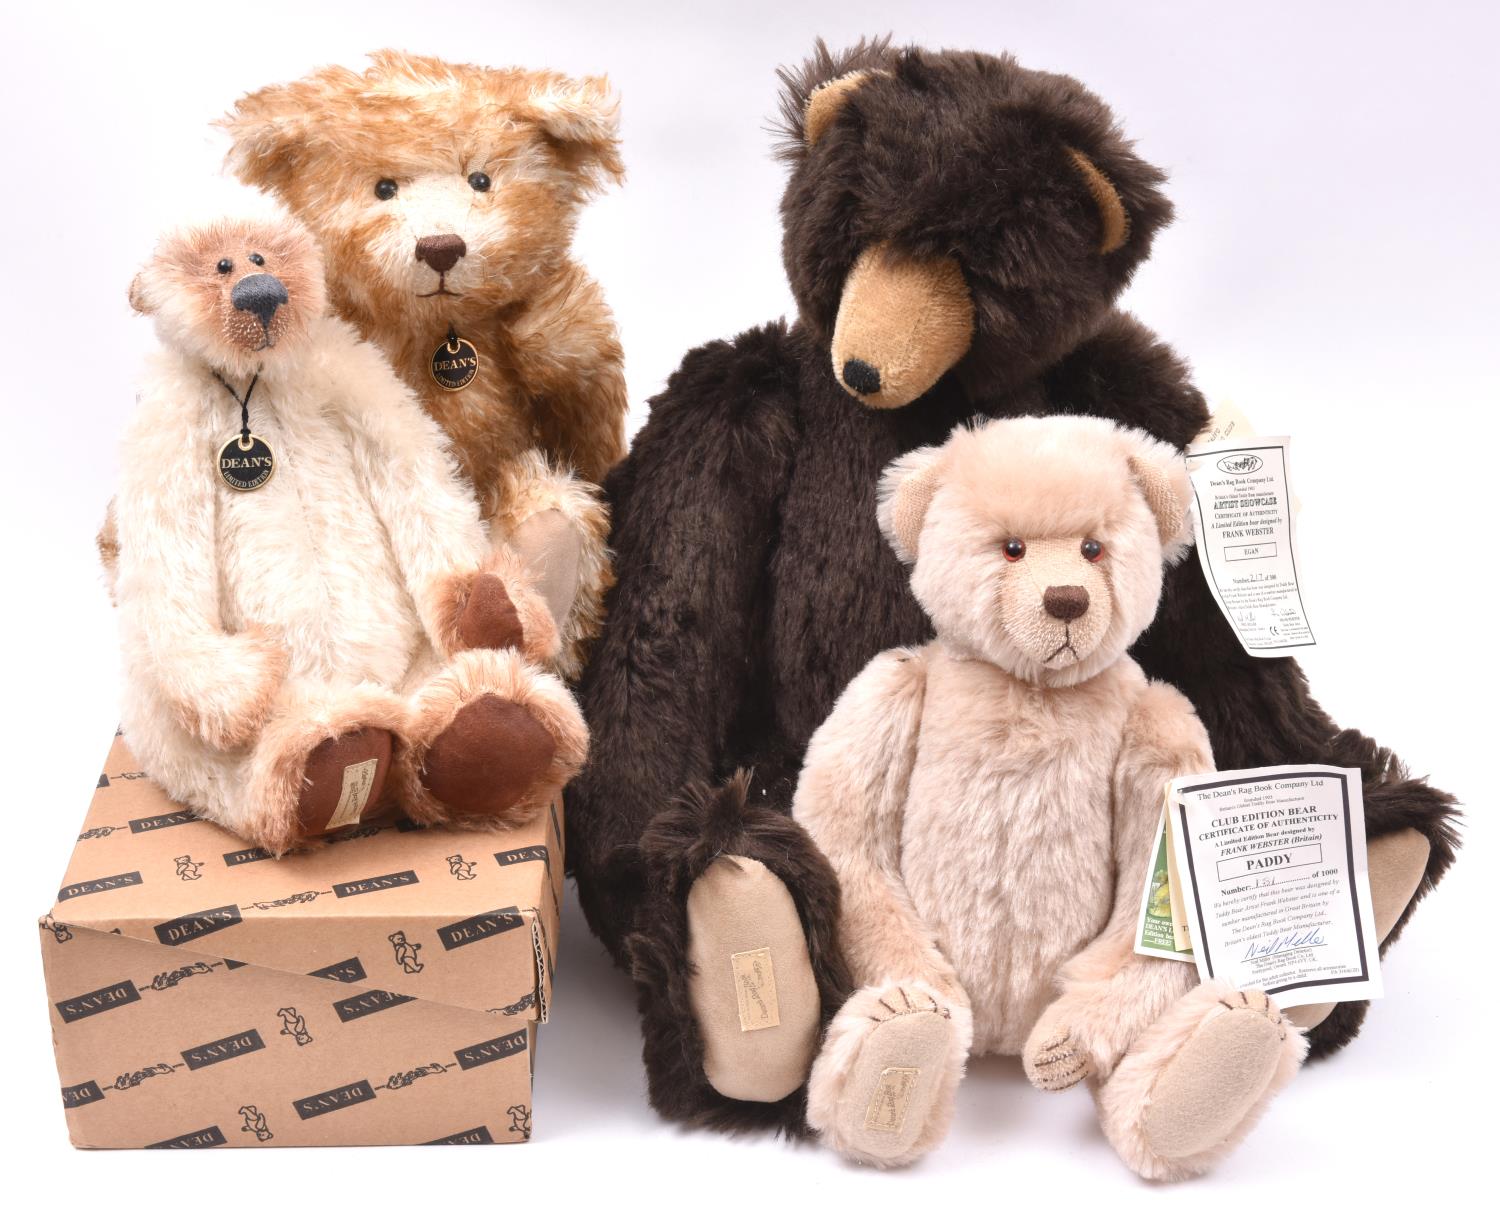 4x Dean's Rag Book Co. Ltd. Teddybears. All with original information labels attached to each